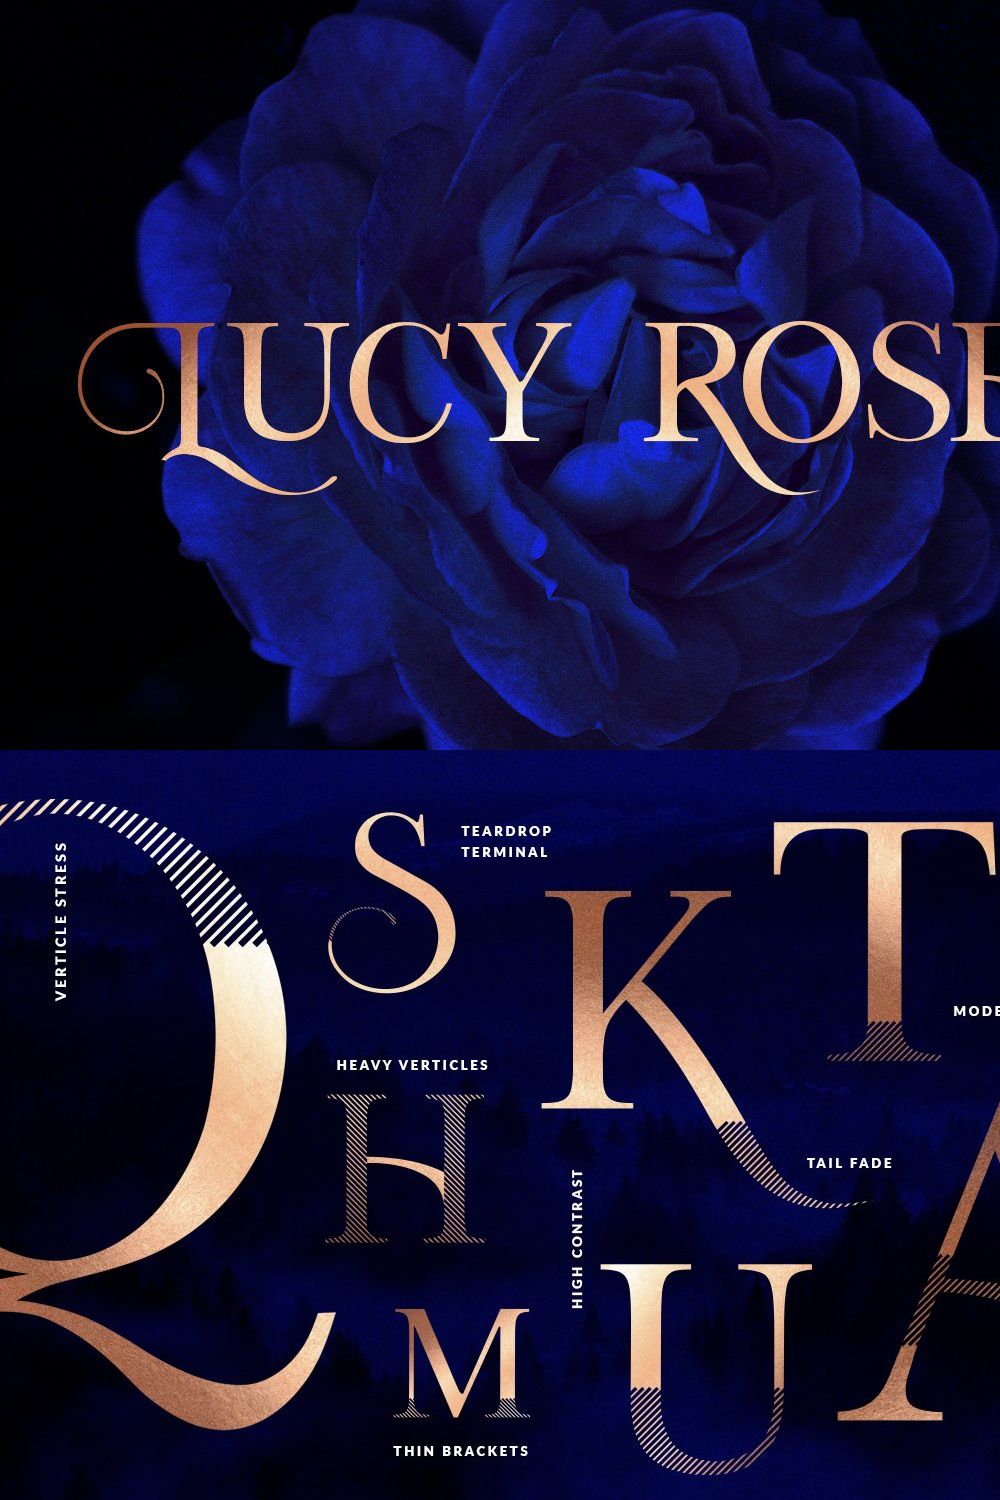 Lucy Rose pinterest preview image.